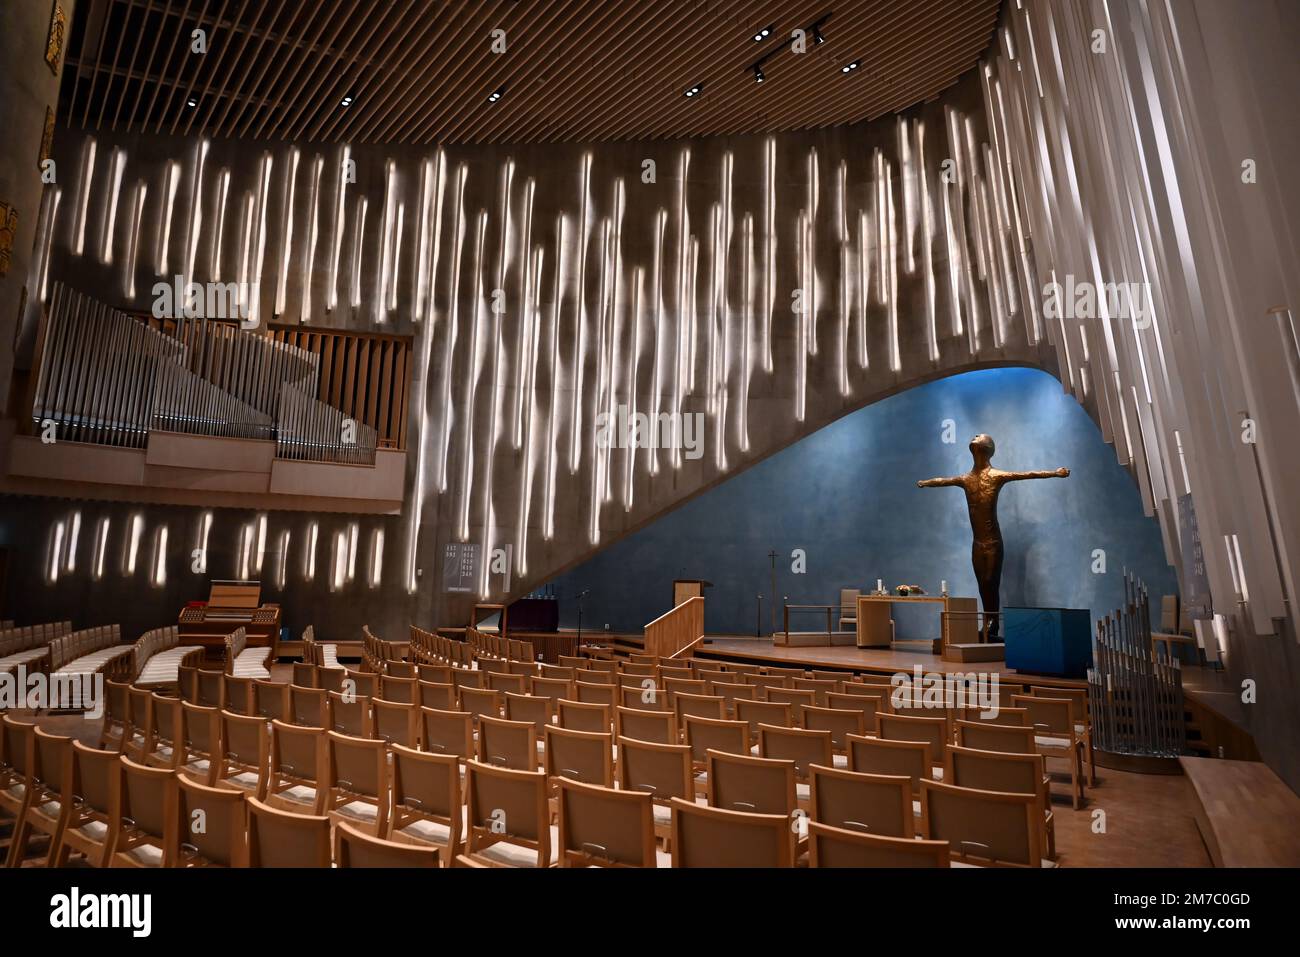 Inside the northern lights cathedral in the town of Alta, norvegian Lapland. Stock Photo